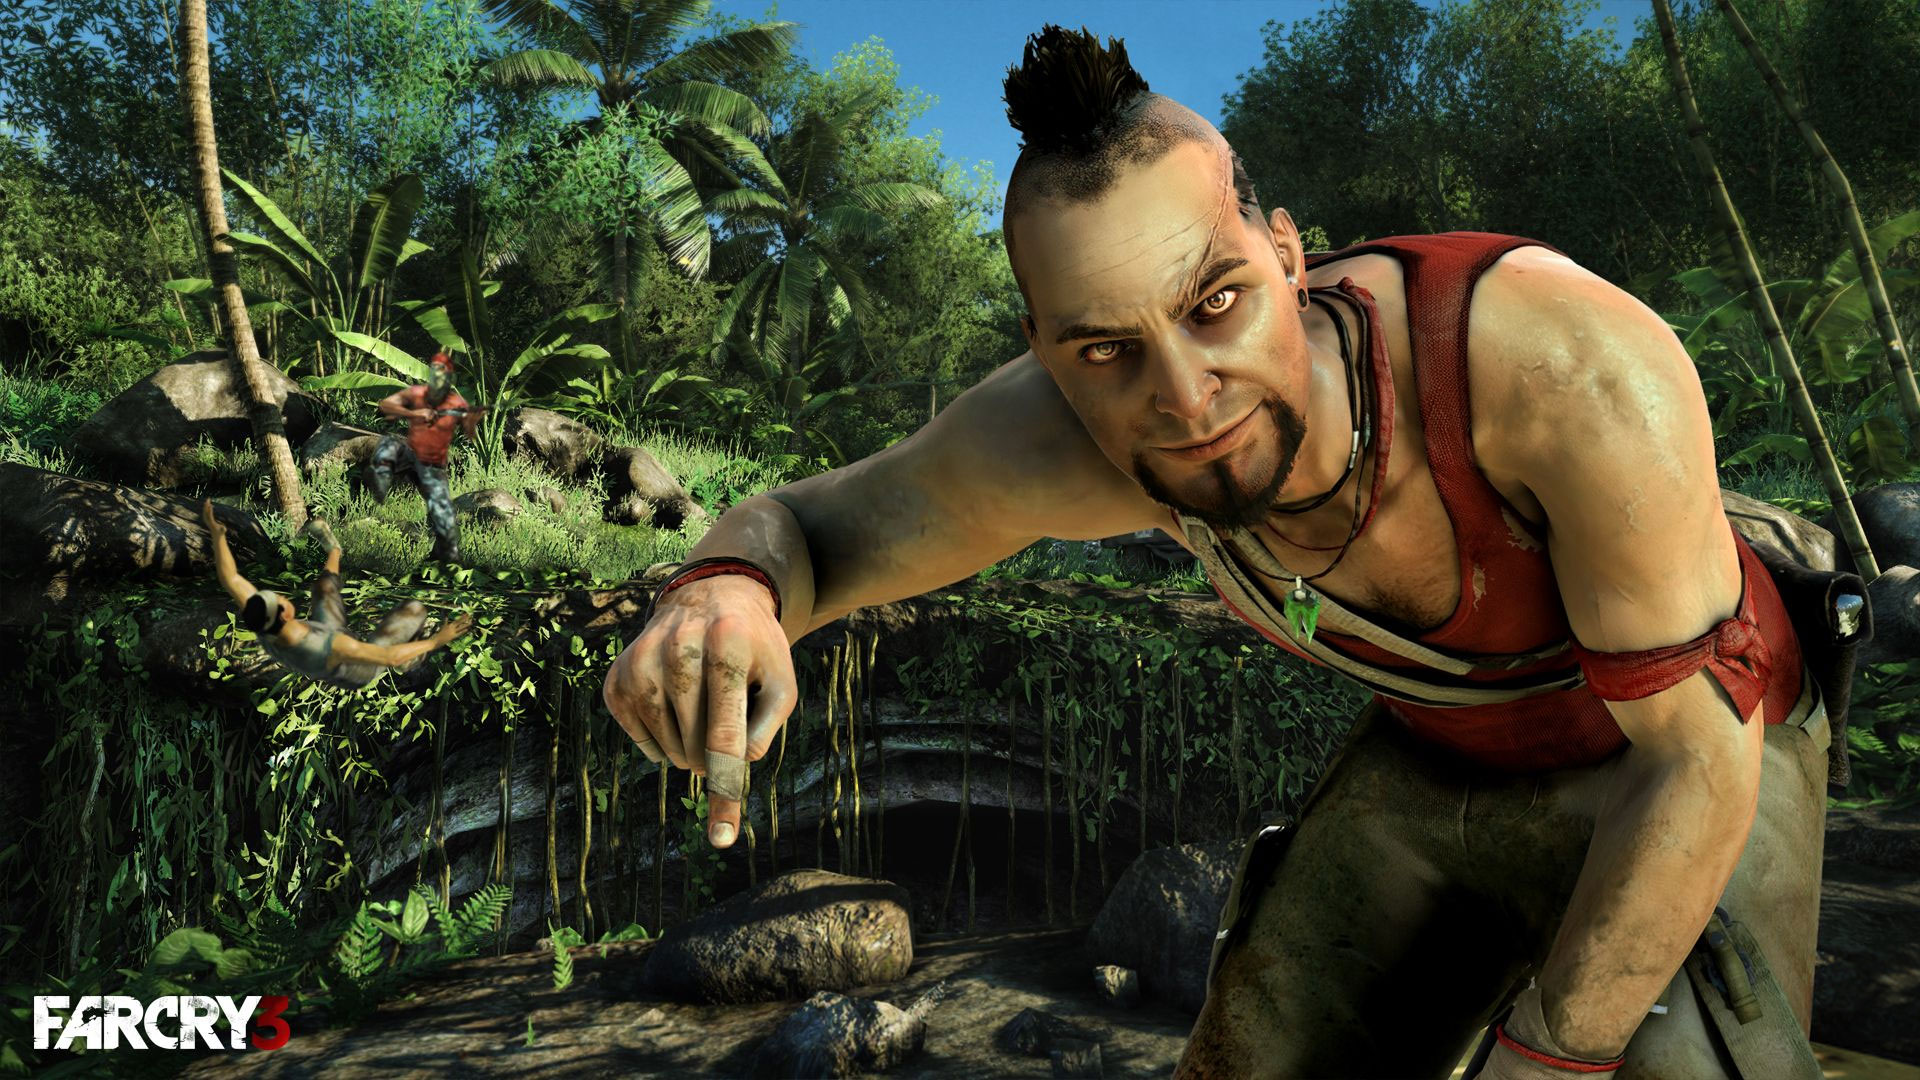 Far Cry 3 Wallpapers in HD Page 1 1920x1080